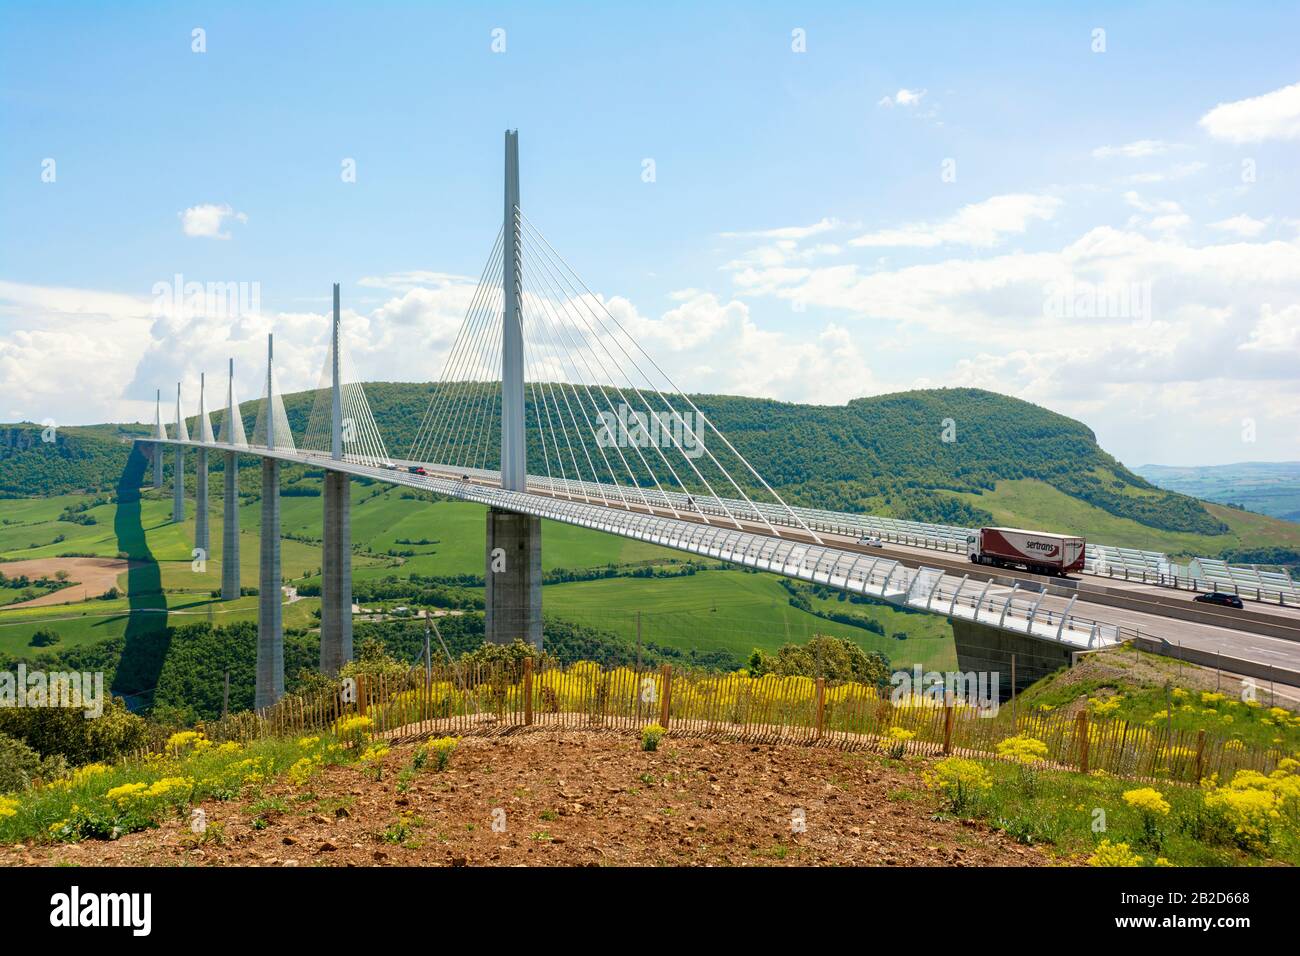 France, Viaduc de Millau (Millau Viaduct), spans Tarn River, view from belvedere viewpoint Stock Photo